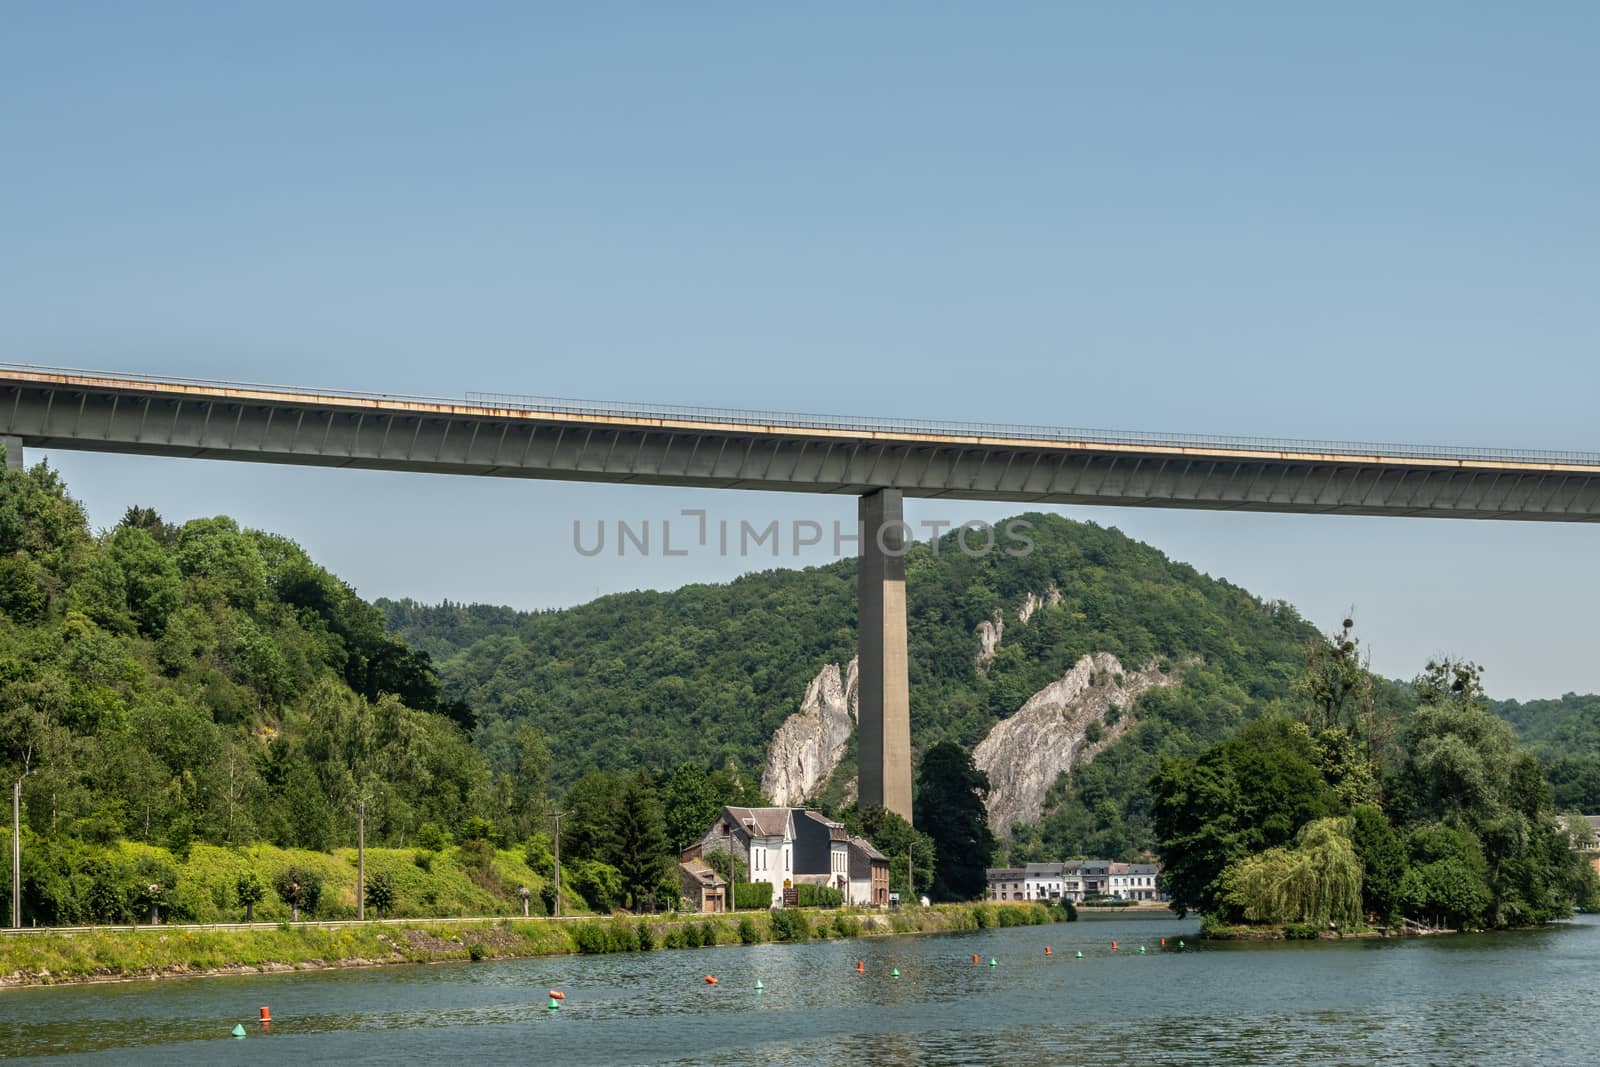 Dinant, Belgium - June 26, 2019: Very high Route Charlemagne, N97, concrete bridge over Meuse River under light blue sky with green forested hills and Ile d’ Amour in center of river.